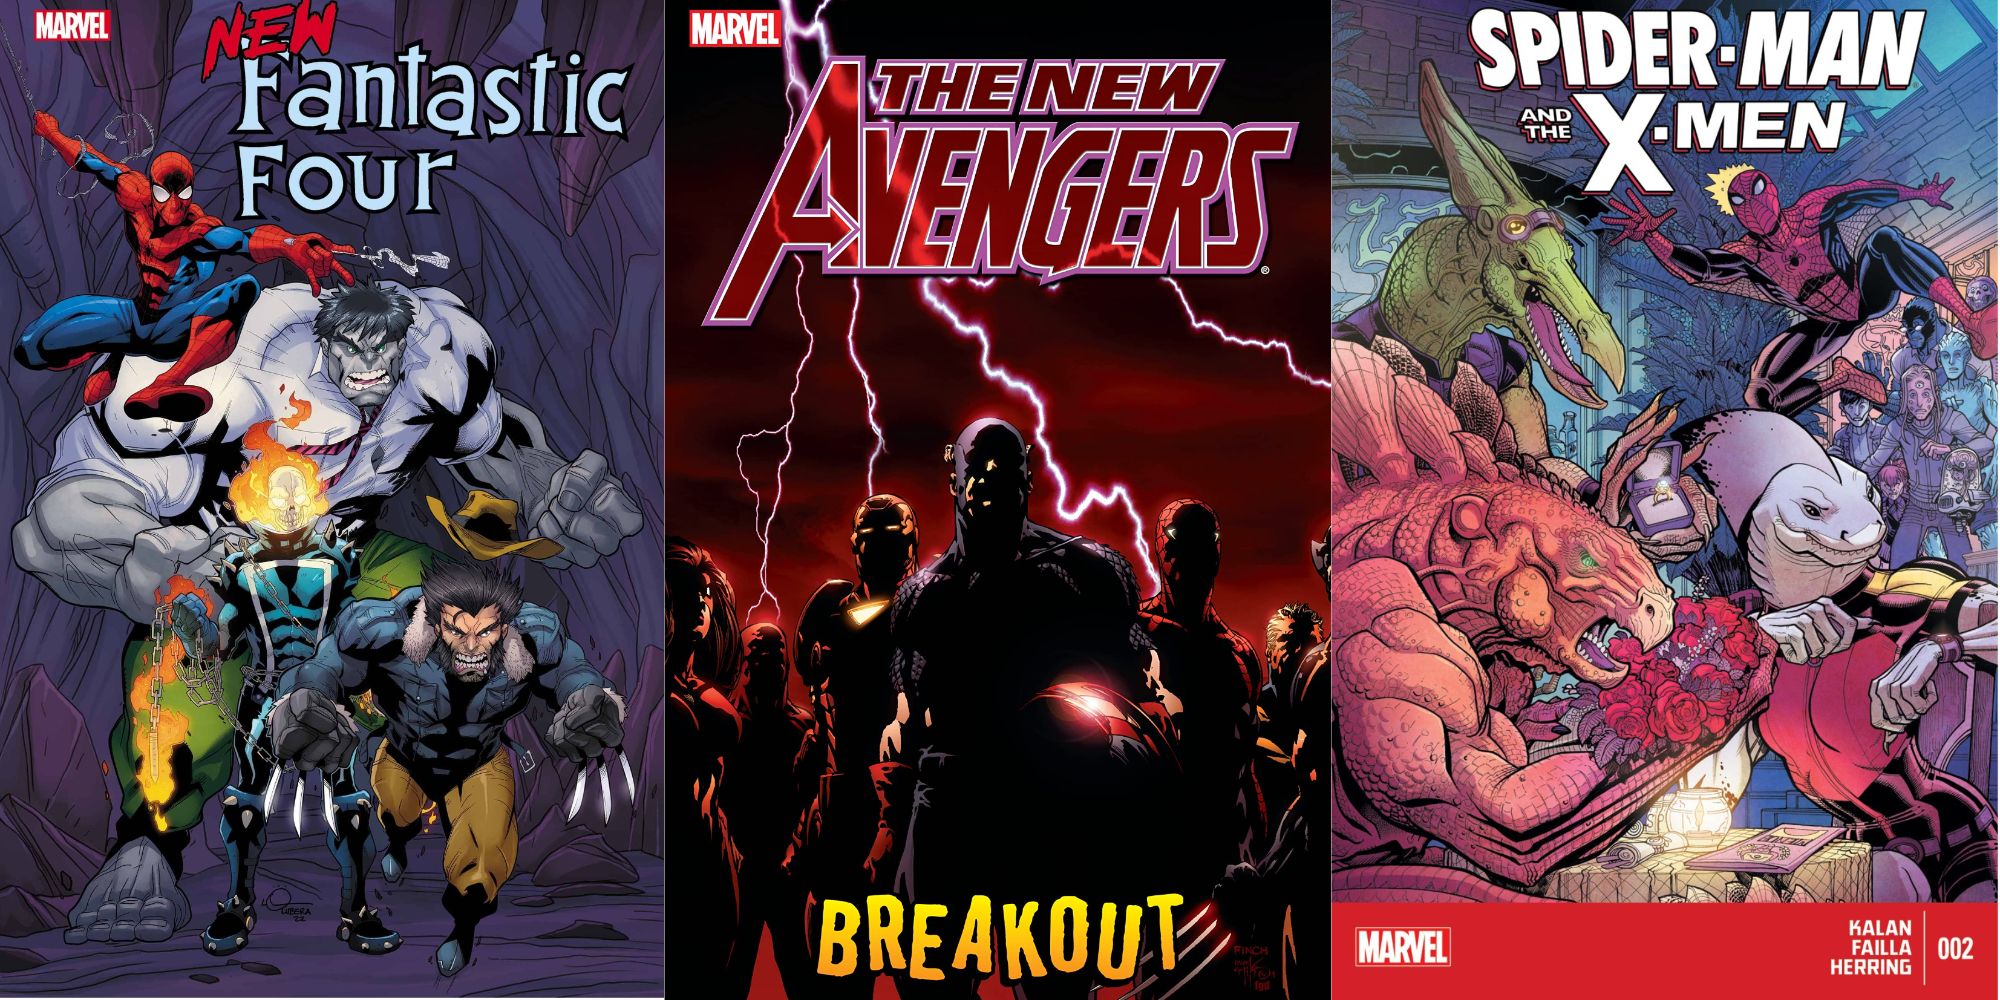 Spider-Man on the Fantastic Four, the New Avengers, and the X-Men